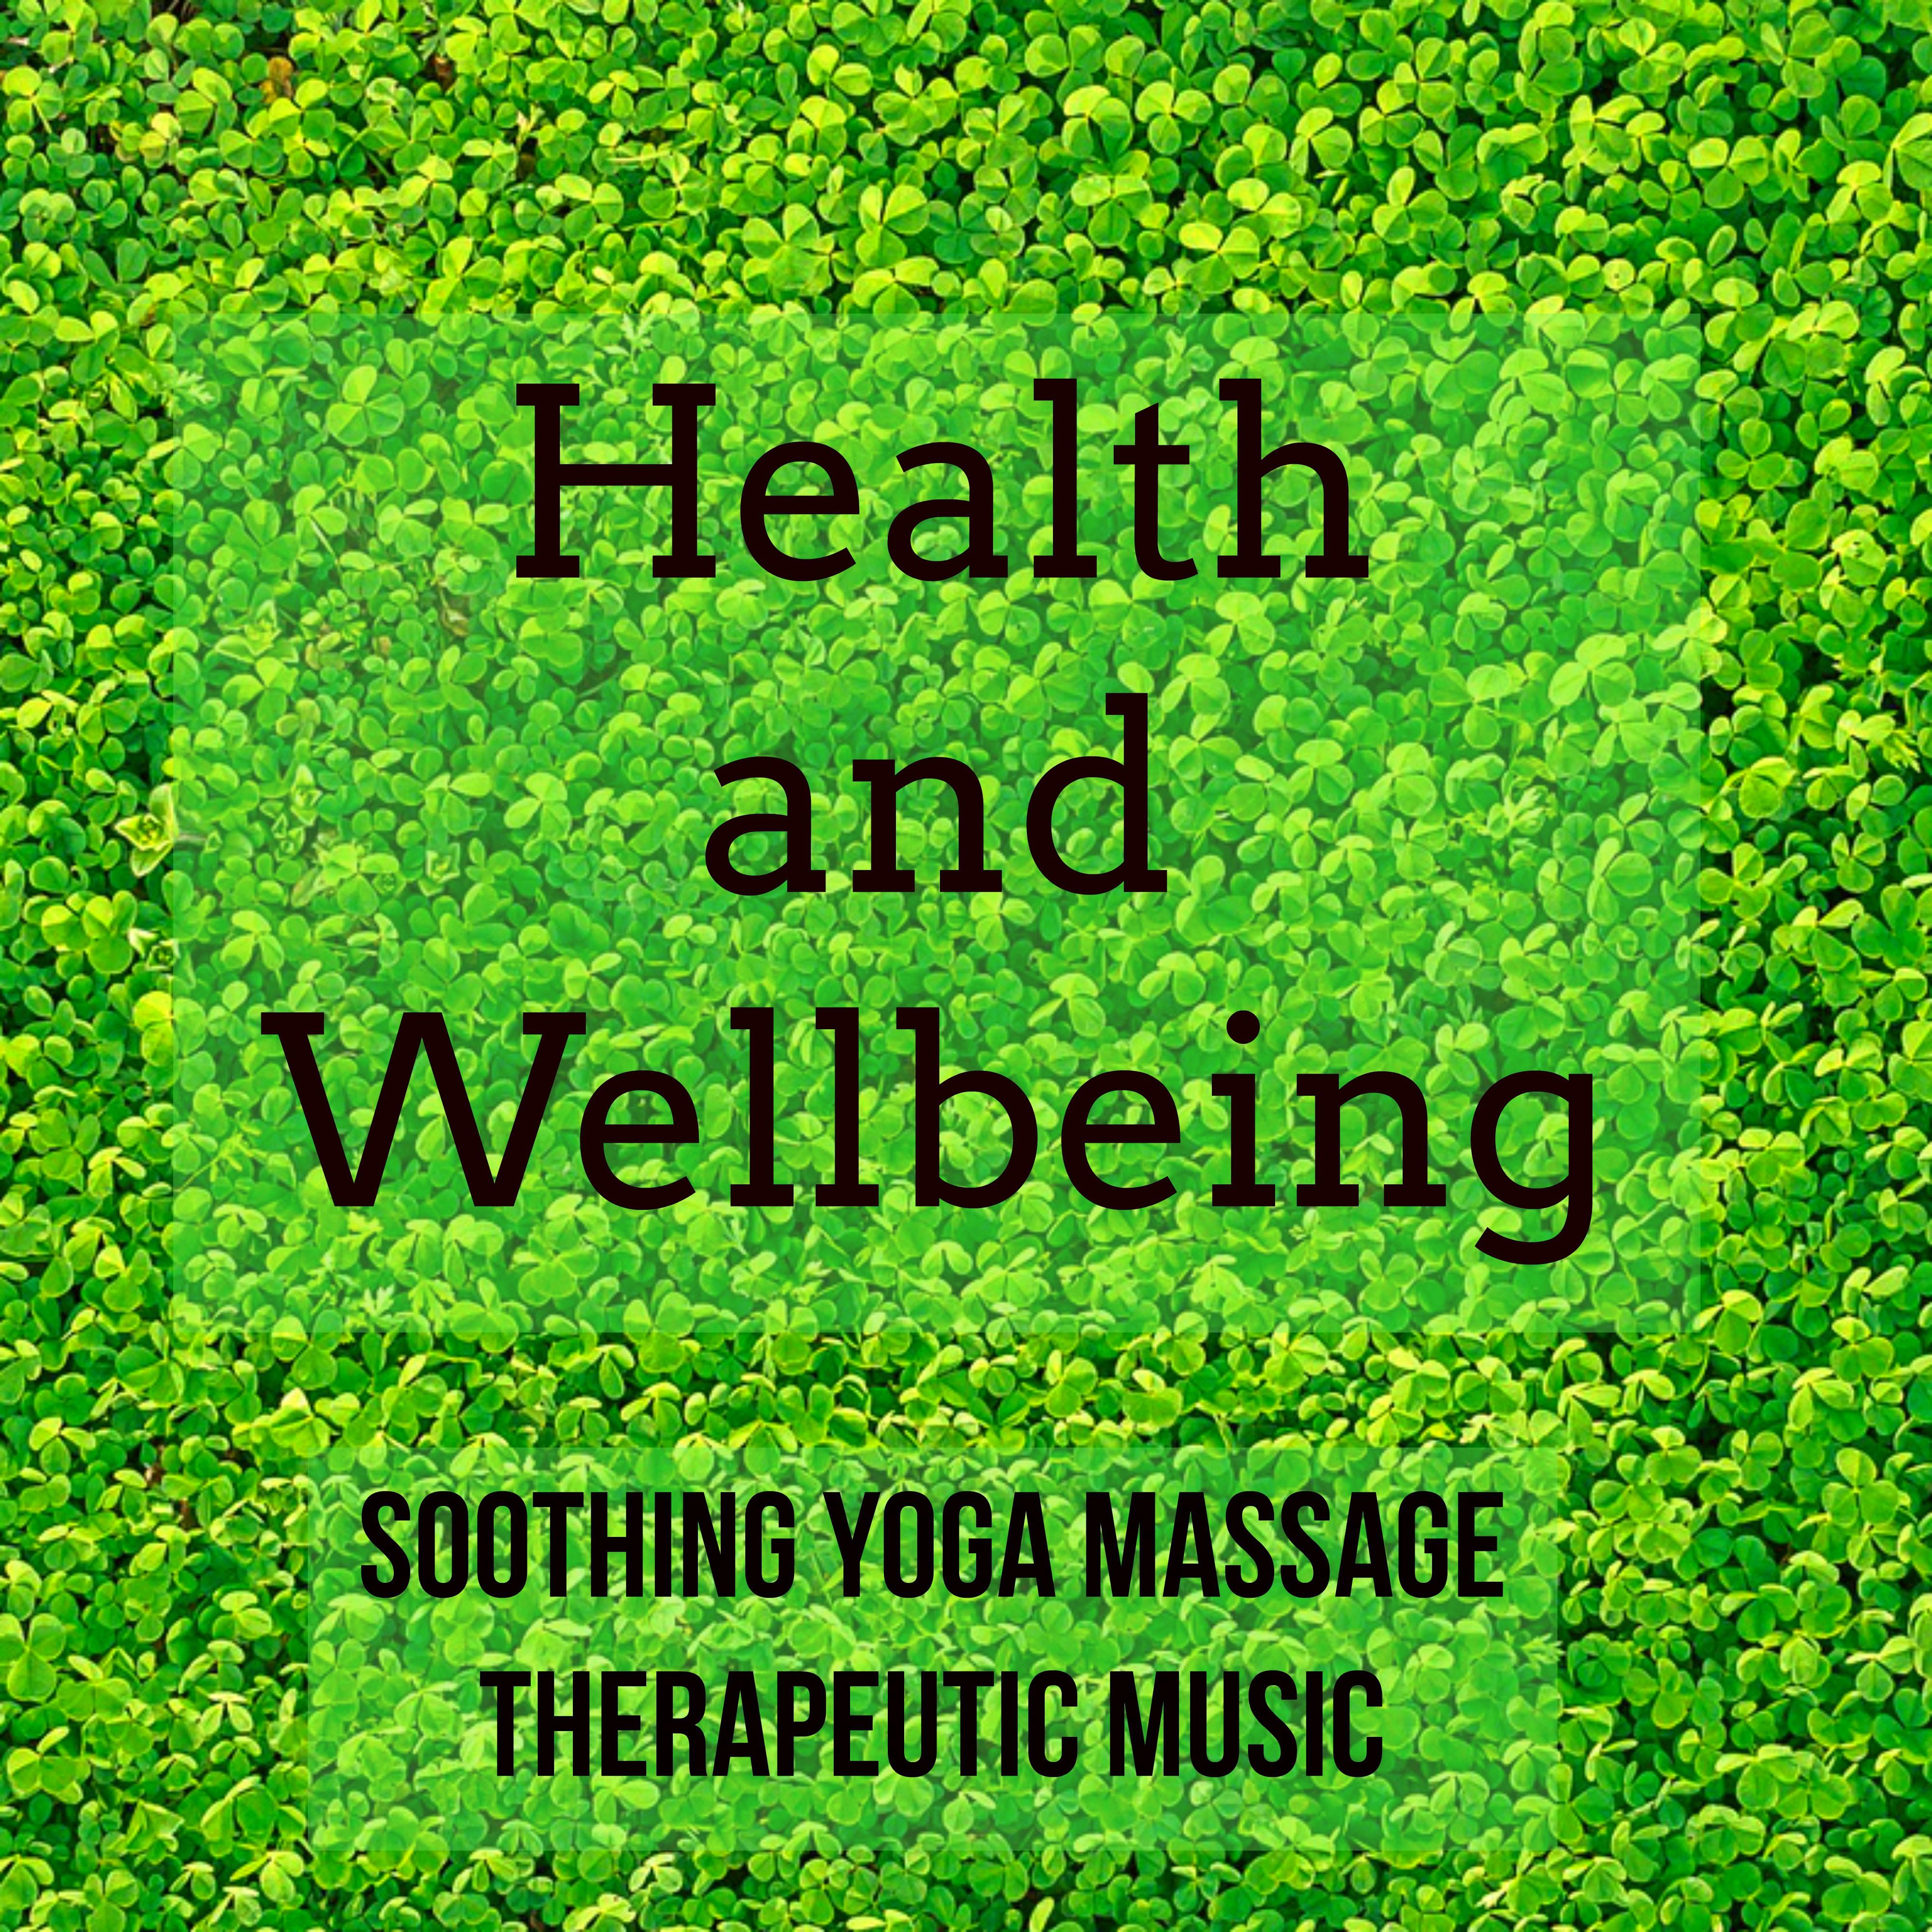 Health and Wellbeing - Soothing Yoga Massage Therapeutic Music with Healing Nature Instrumental Sounds